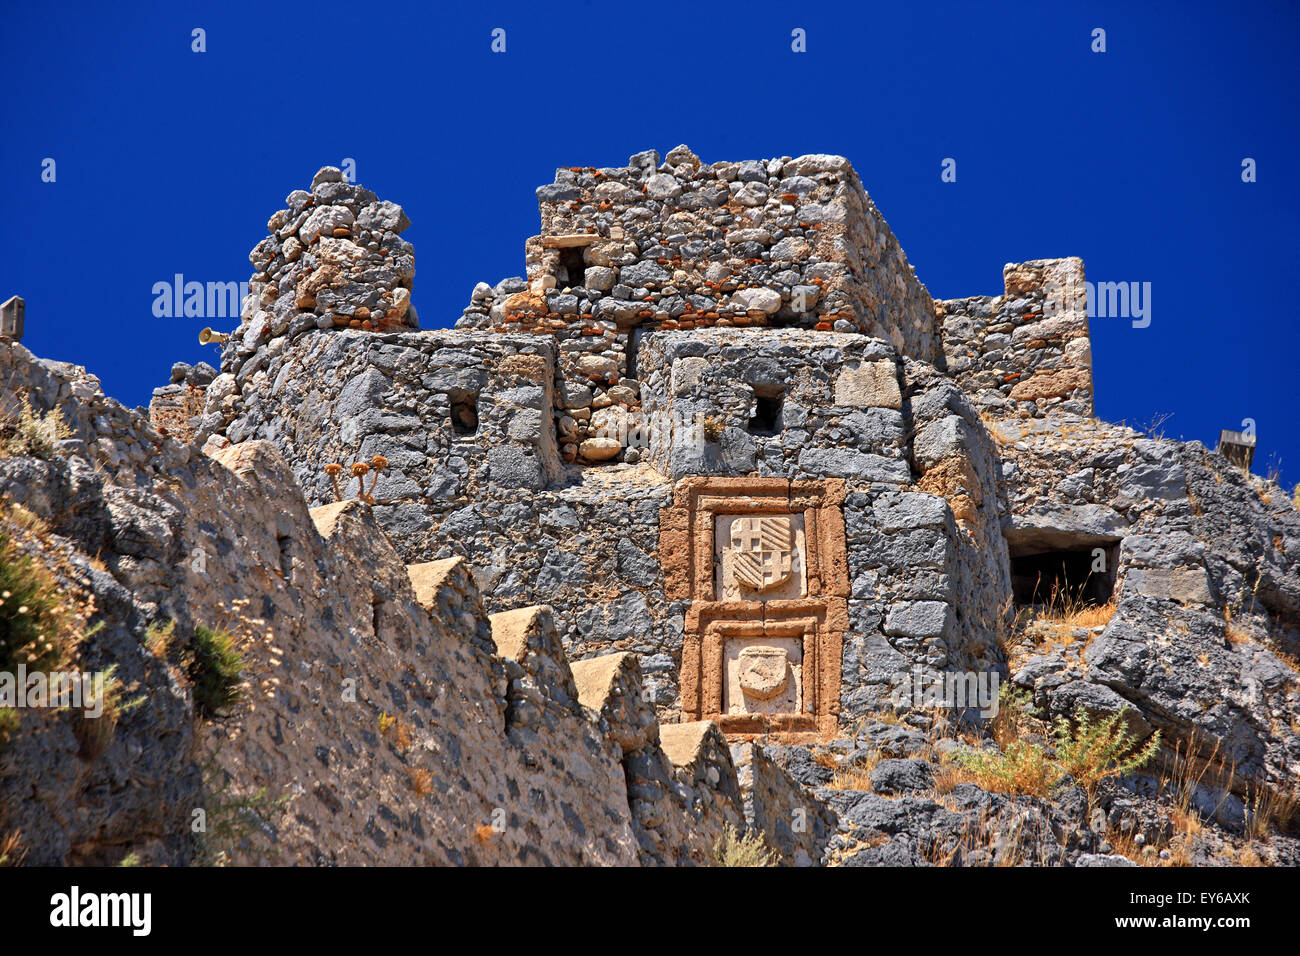 'Detail' from the Castle of Chora, Kalymnos island, Dodecanese, Aegean sea, Greece Stock Photo